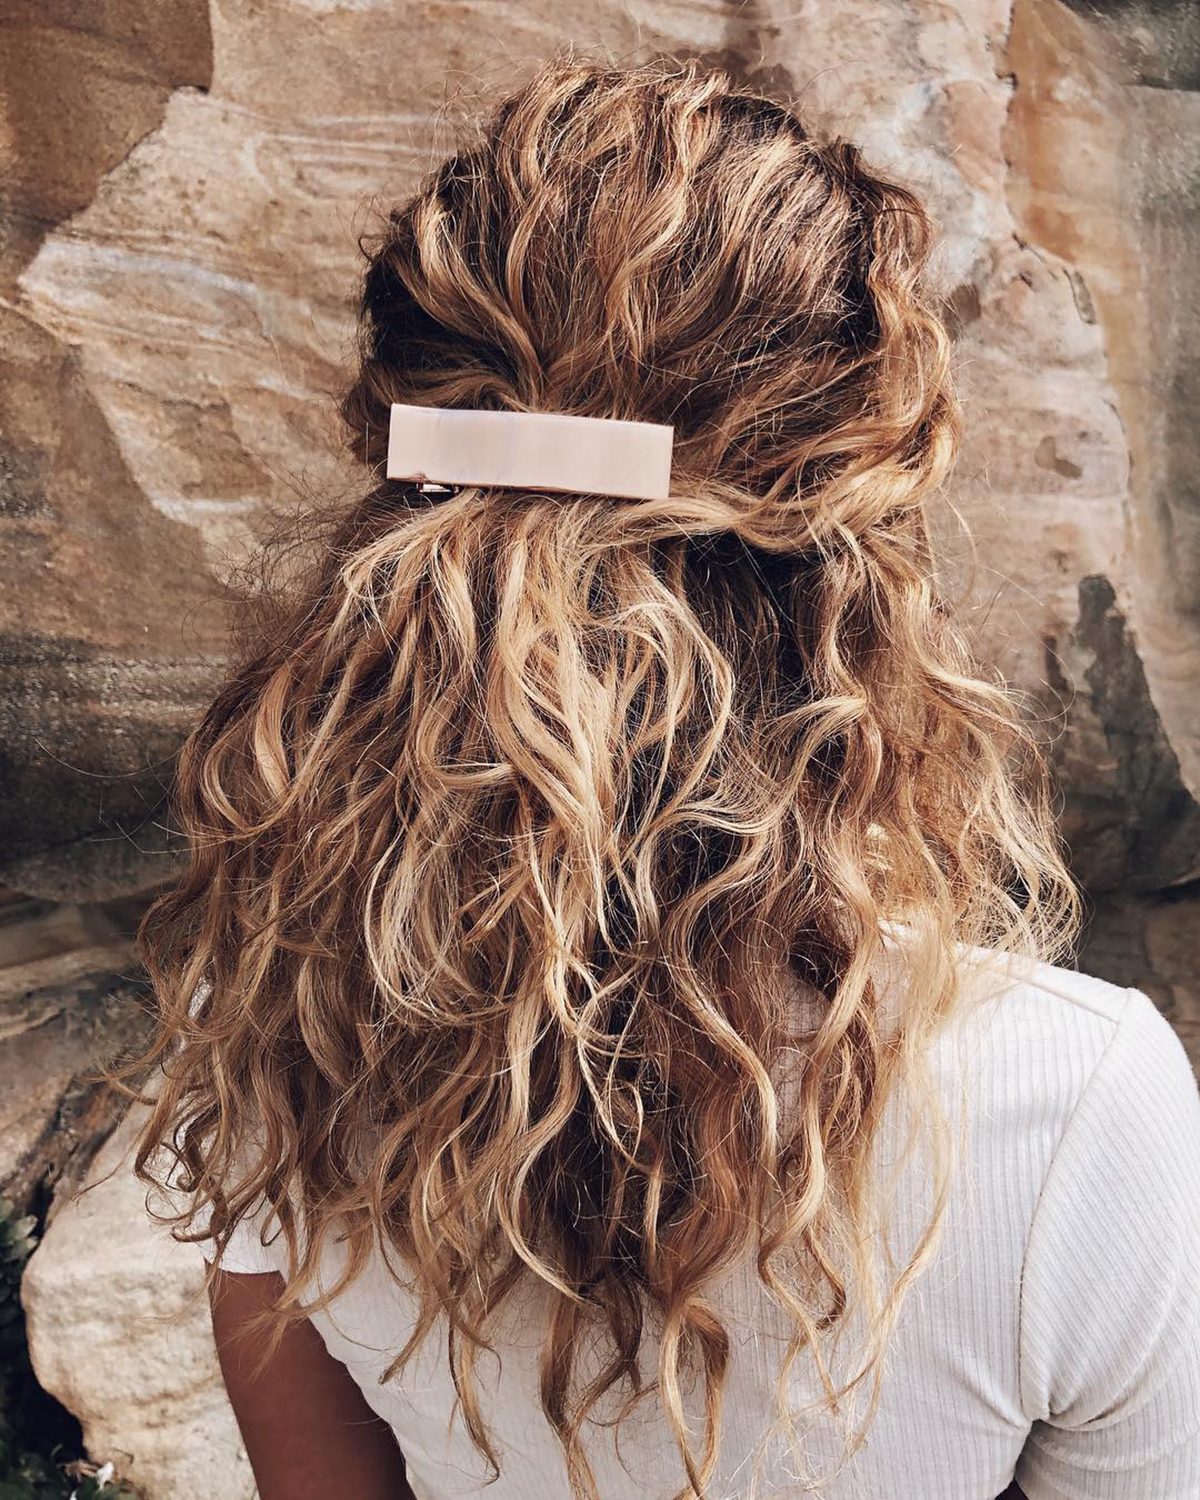 How to get beach waves